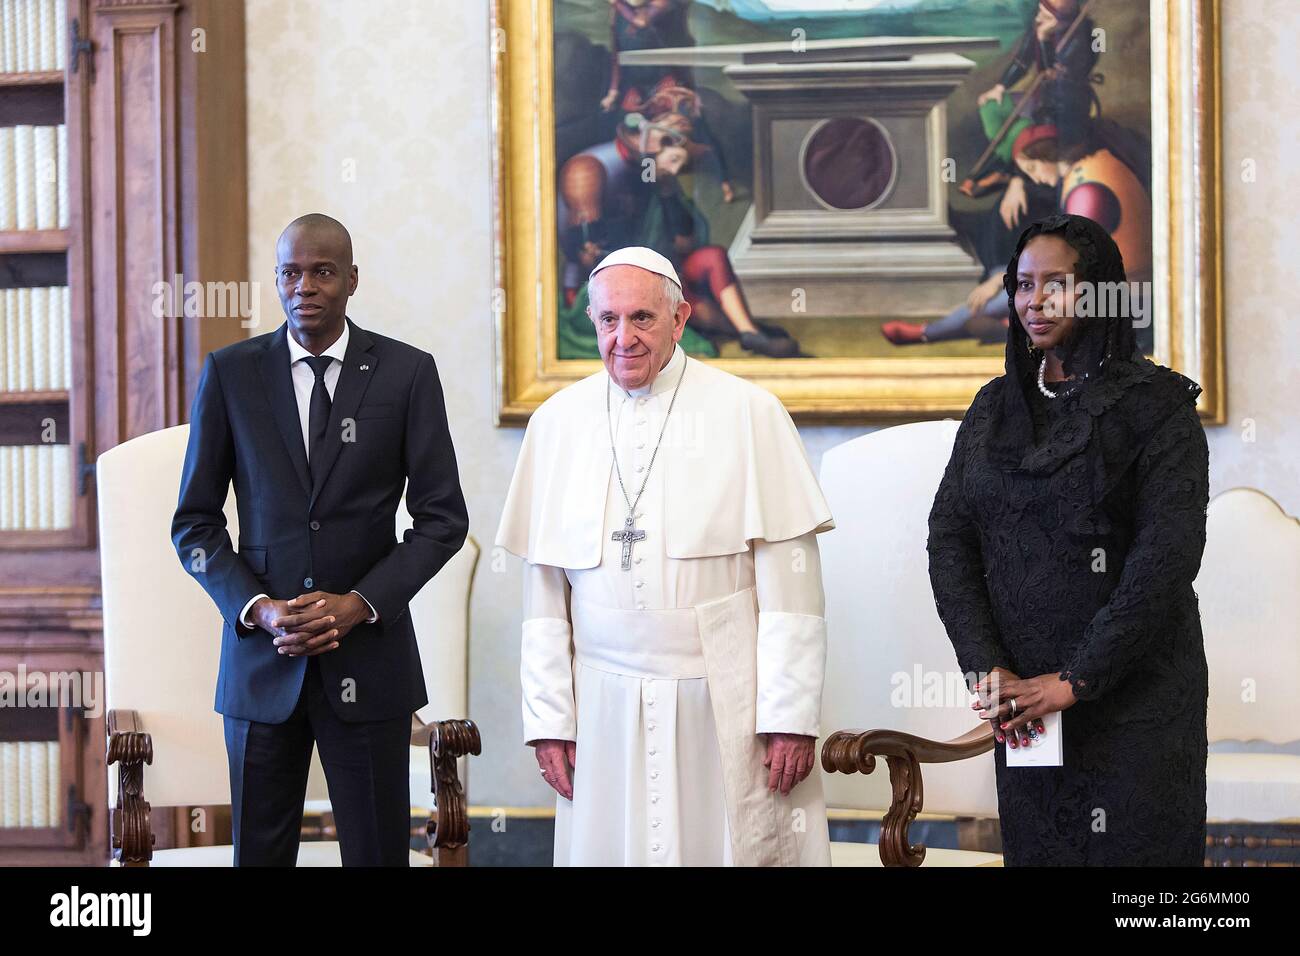 Vatican City State, Vatikanstadt. 07th July, 2021. the president of Haiti, Jovenel Moïse, was assassinated: he was 53 years old. In the photo Pope Francis with the President of the Republic of Haiti H.E. Mr. Jovenel Moise with his wife Martine Moïse. 26 January 2018 Credit: dpa/Alamy Live News Stock Photo